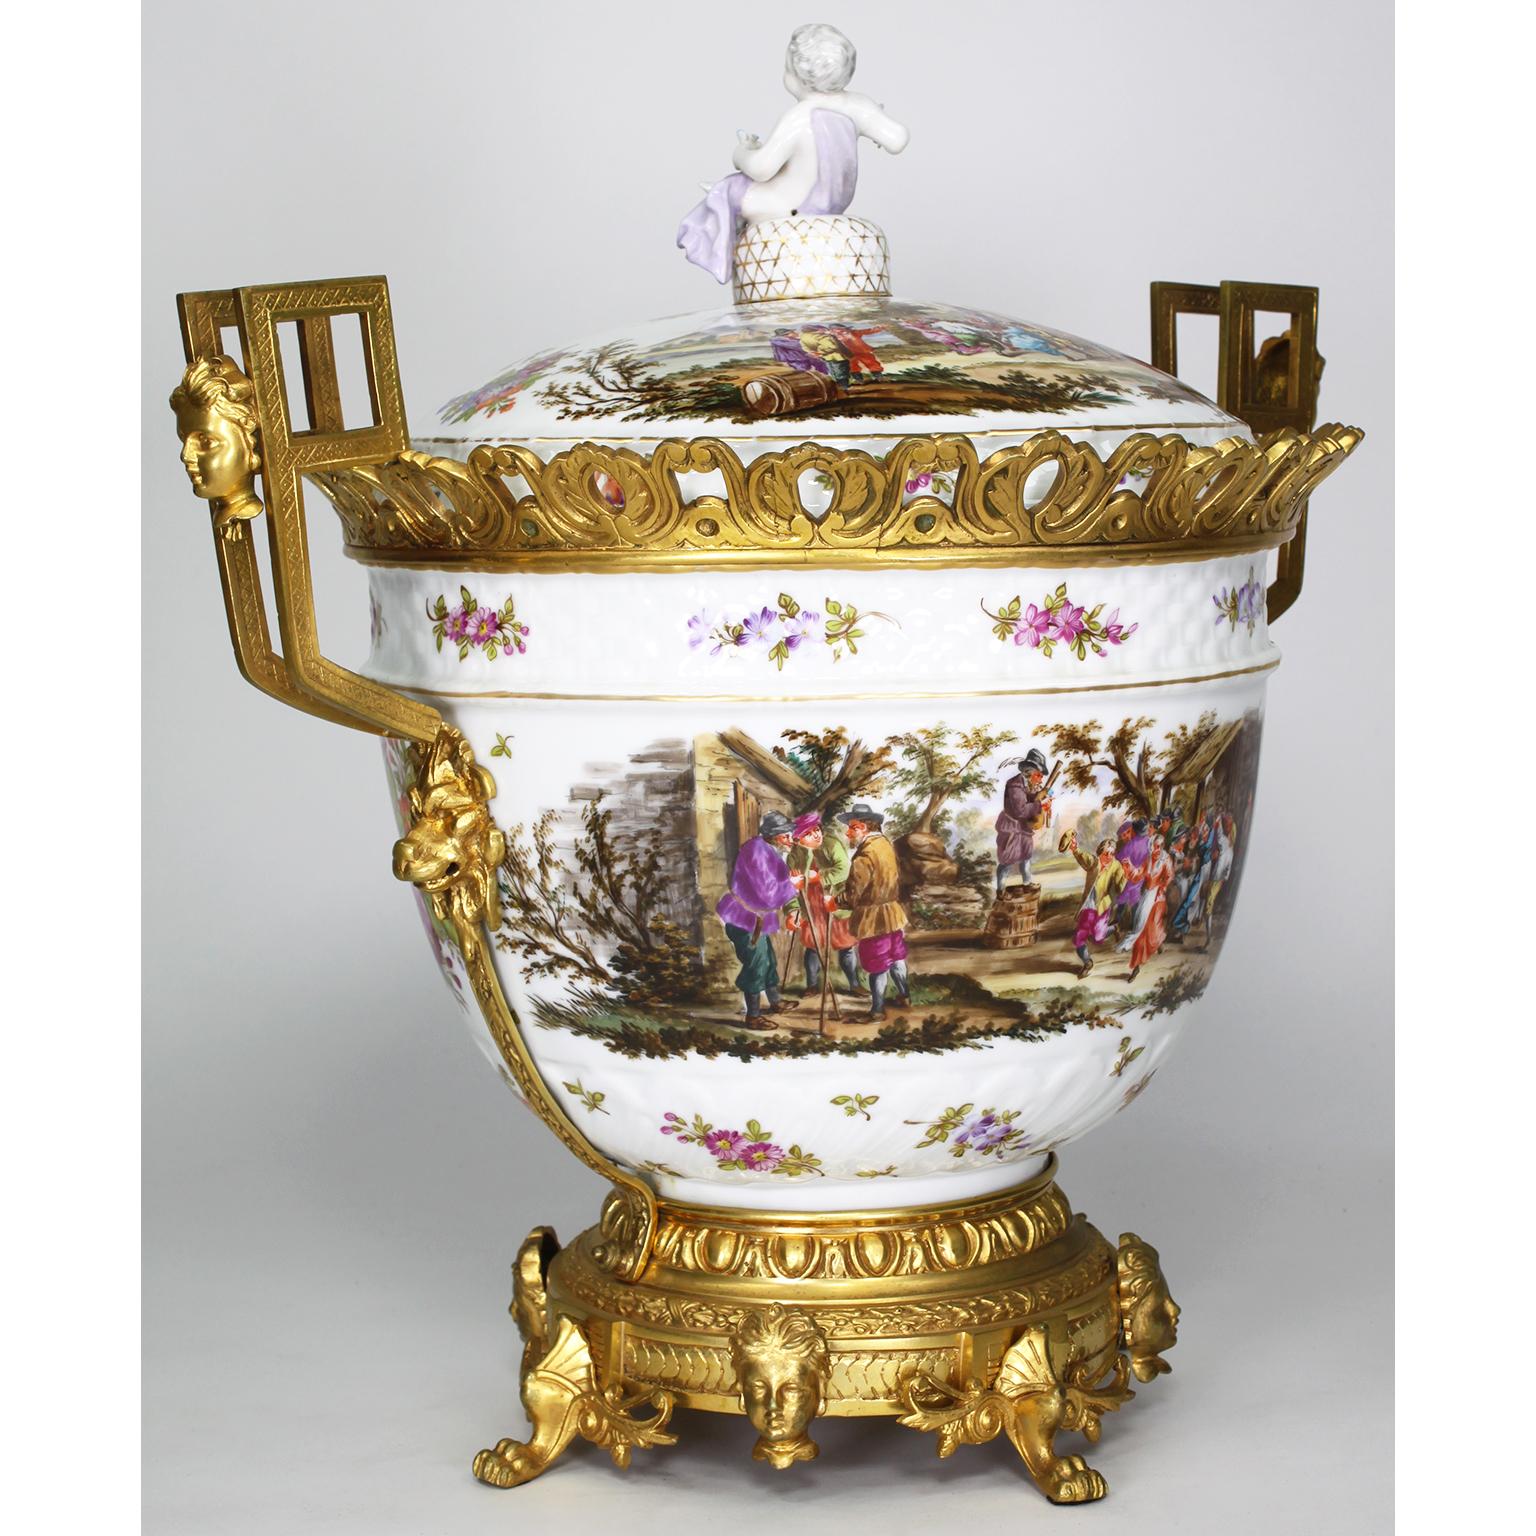 Large German Porcelain & Gilt-Bronze Mounted Urn with Cover in Manner of Meissen In Good Condition For Sale In Los Angeles, CA